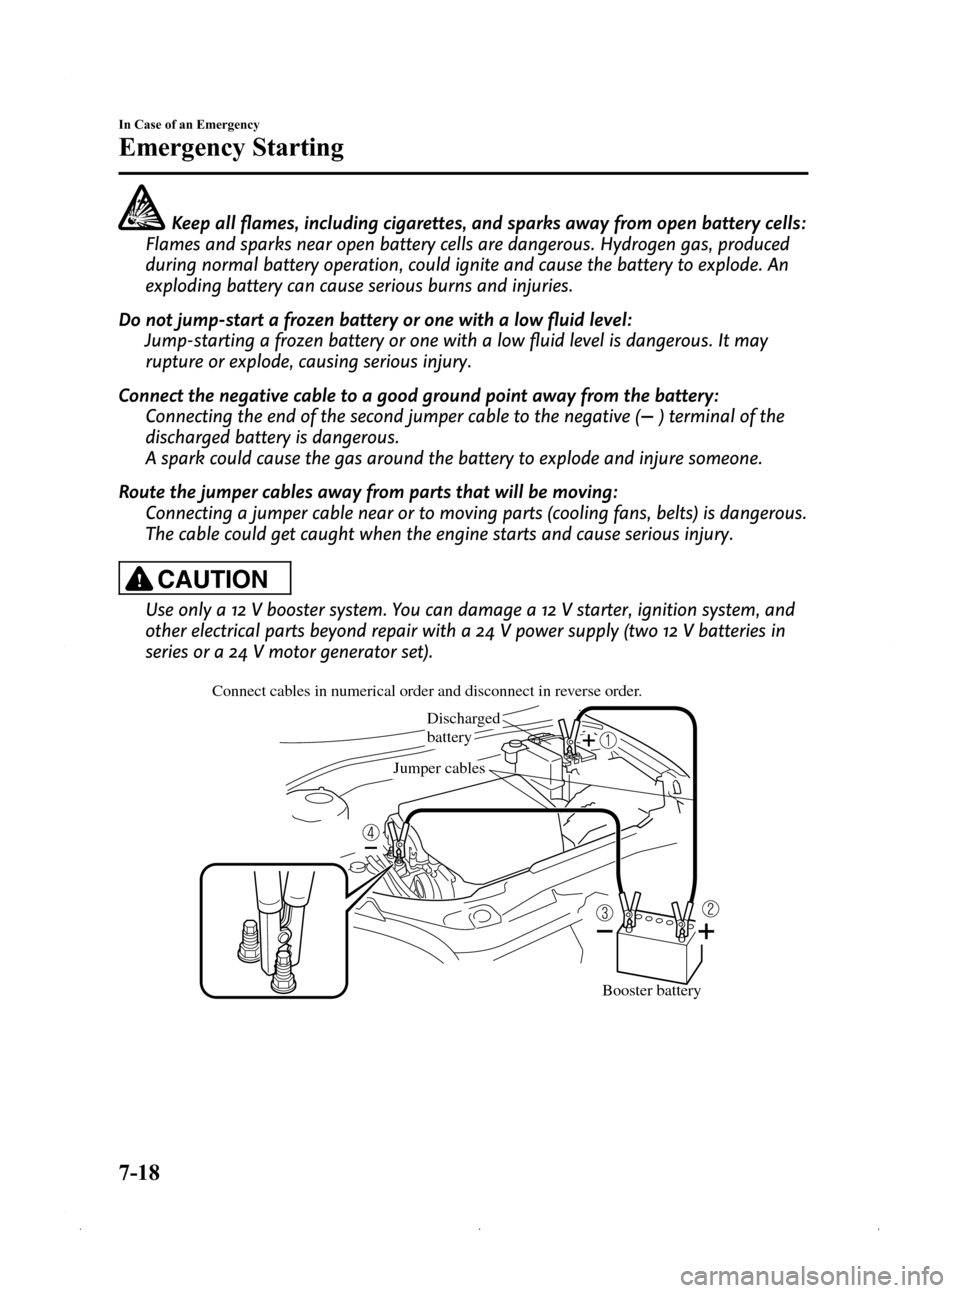 MAZDA MODEL 3 HATCHBACK 2009  Owners Manual (in English) Black plate (280,1)
Keep all flames, including cigarettes, and sparks away from open battery cells:
Flames and sparks near open battery cells are dangerous. Hydrogen gas, produced
during normal batter